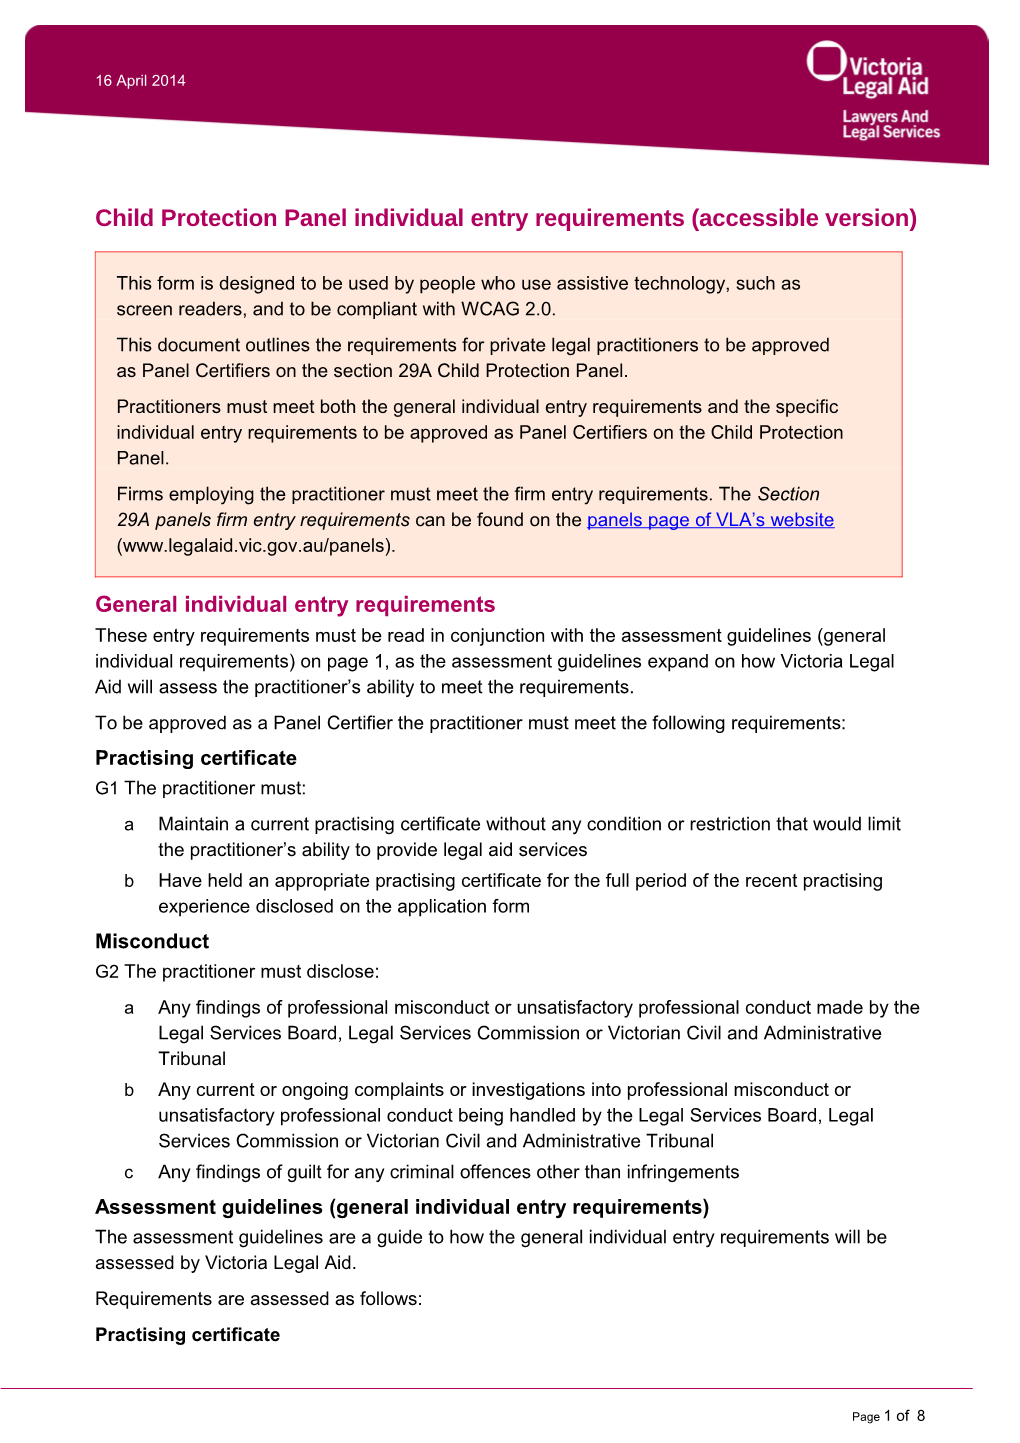 Child Protection Panel Individual Entry Requirements (Accessible Version)